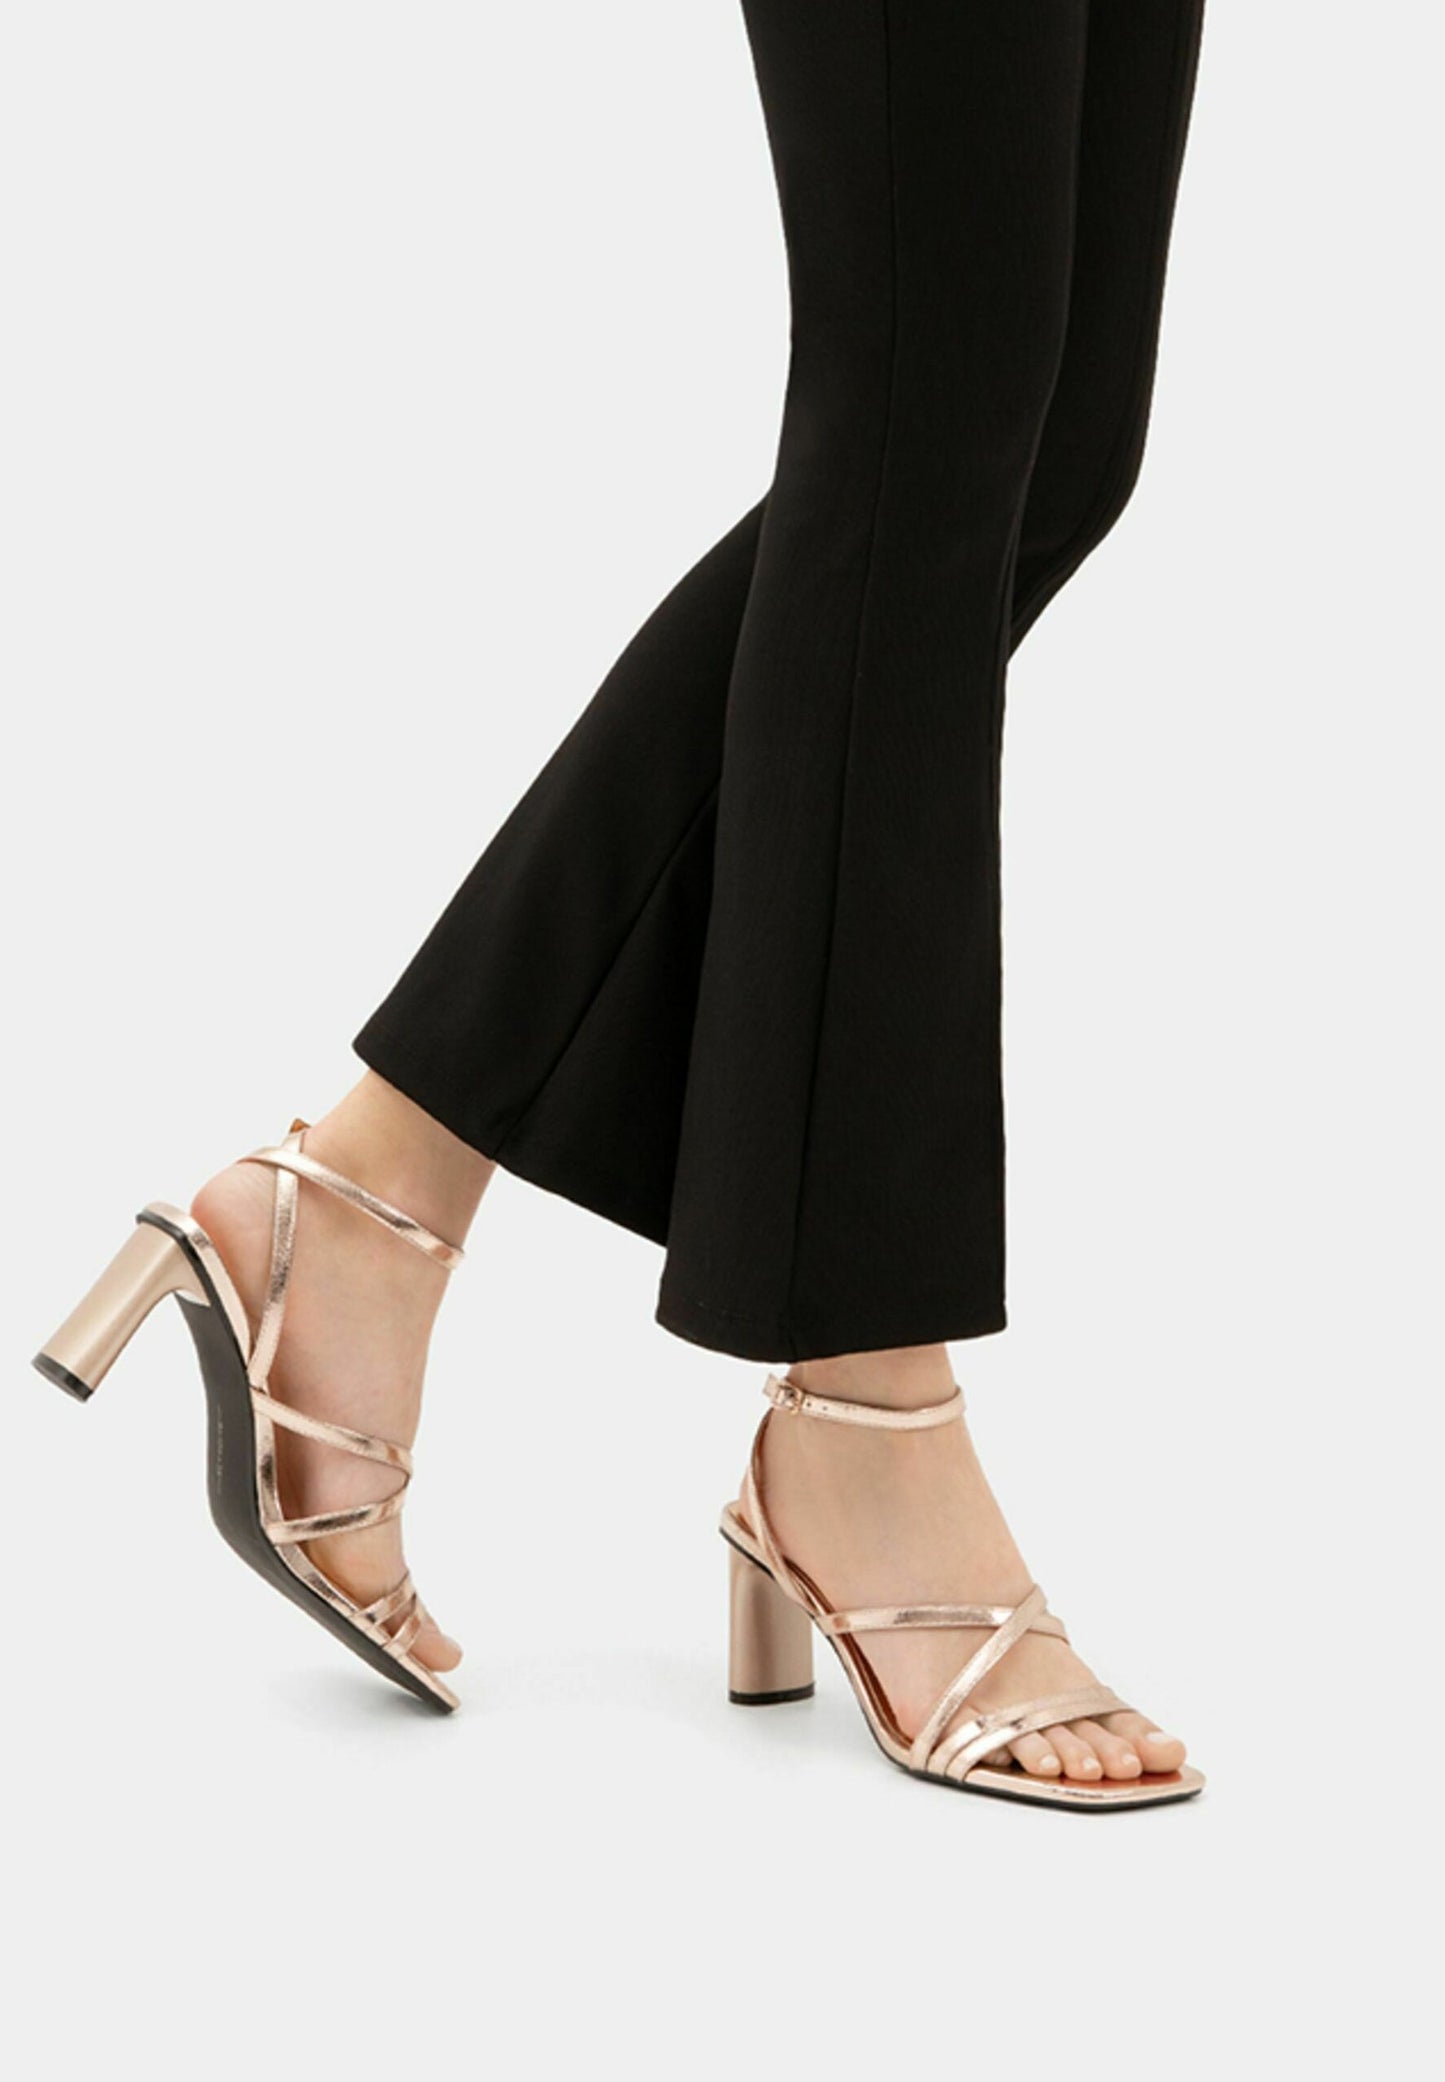 BERKSHA High-Heel Strappy Sandals With Ankle Strap - GOLD